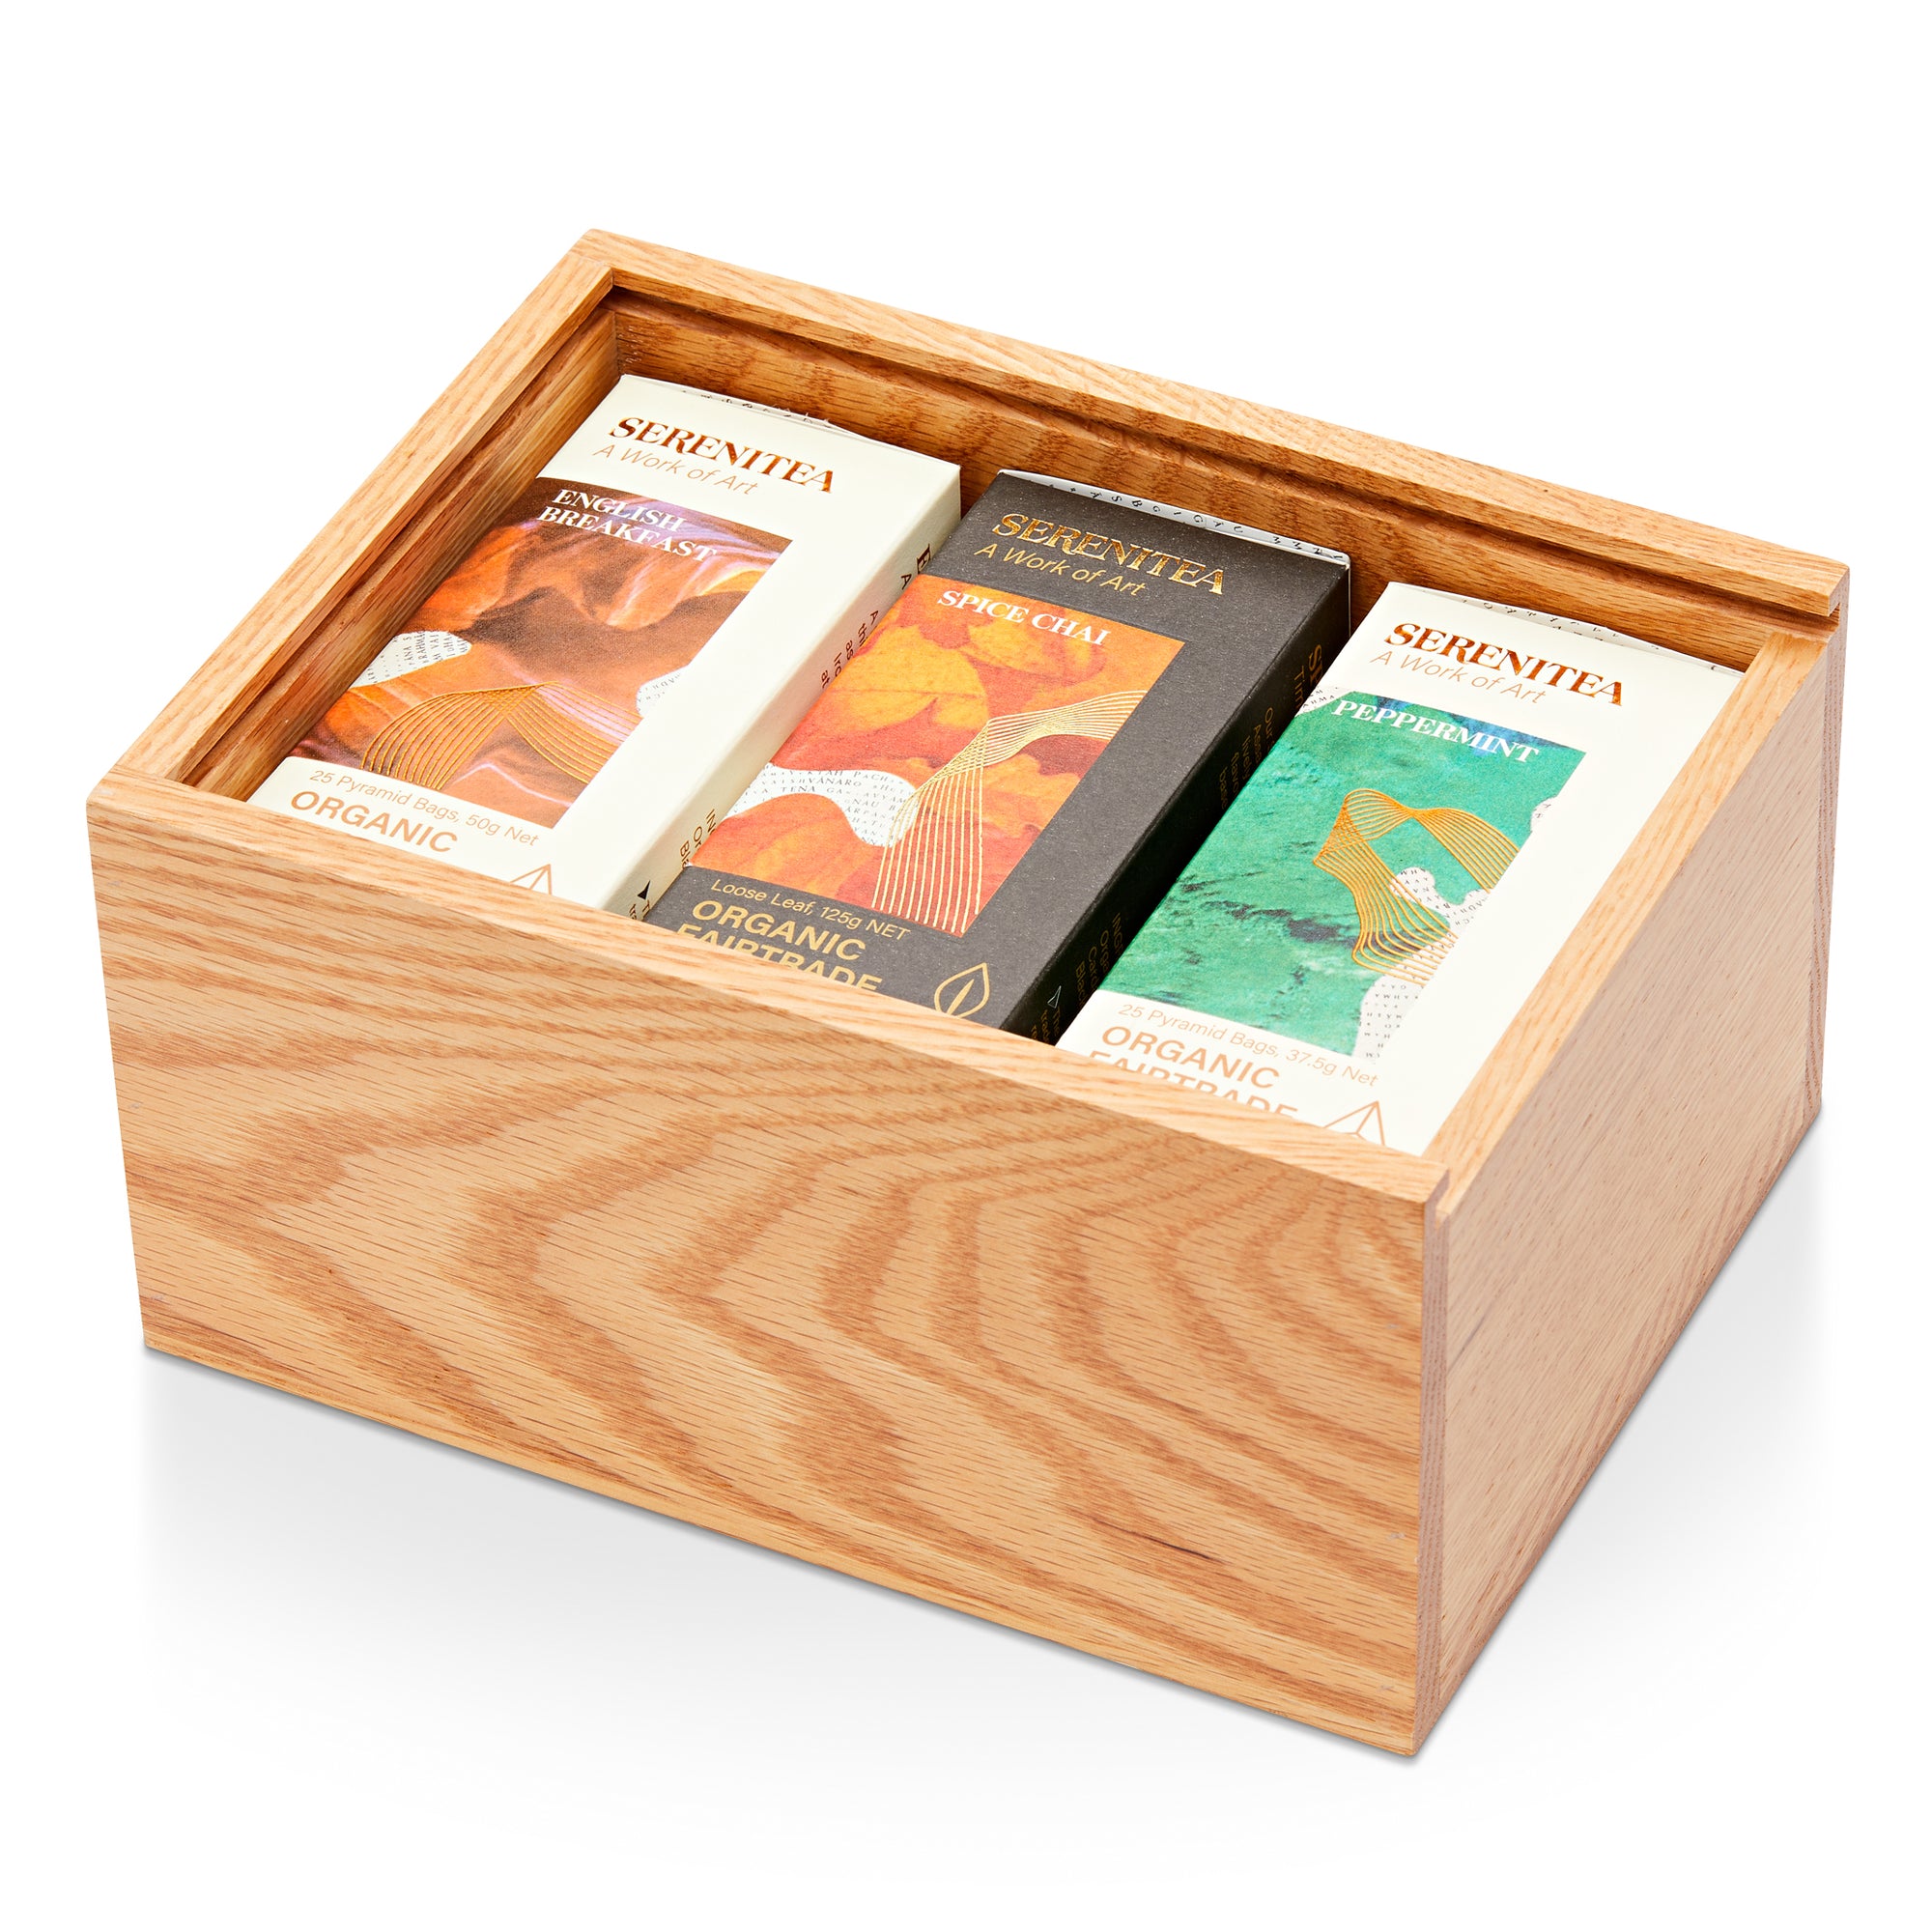 Wooden Gift Box Filled with 3 retail boxes